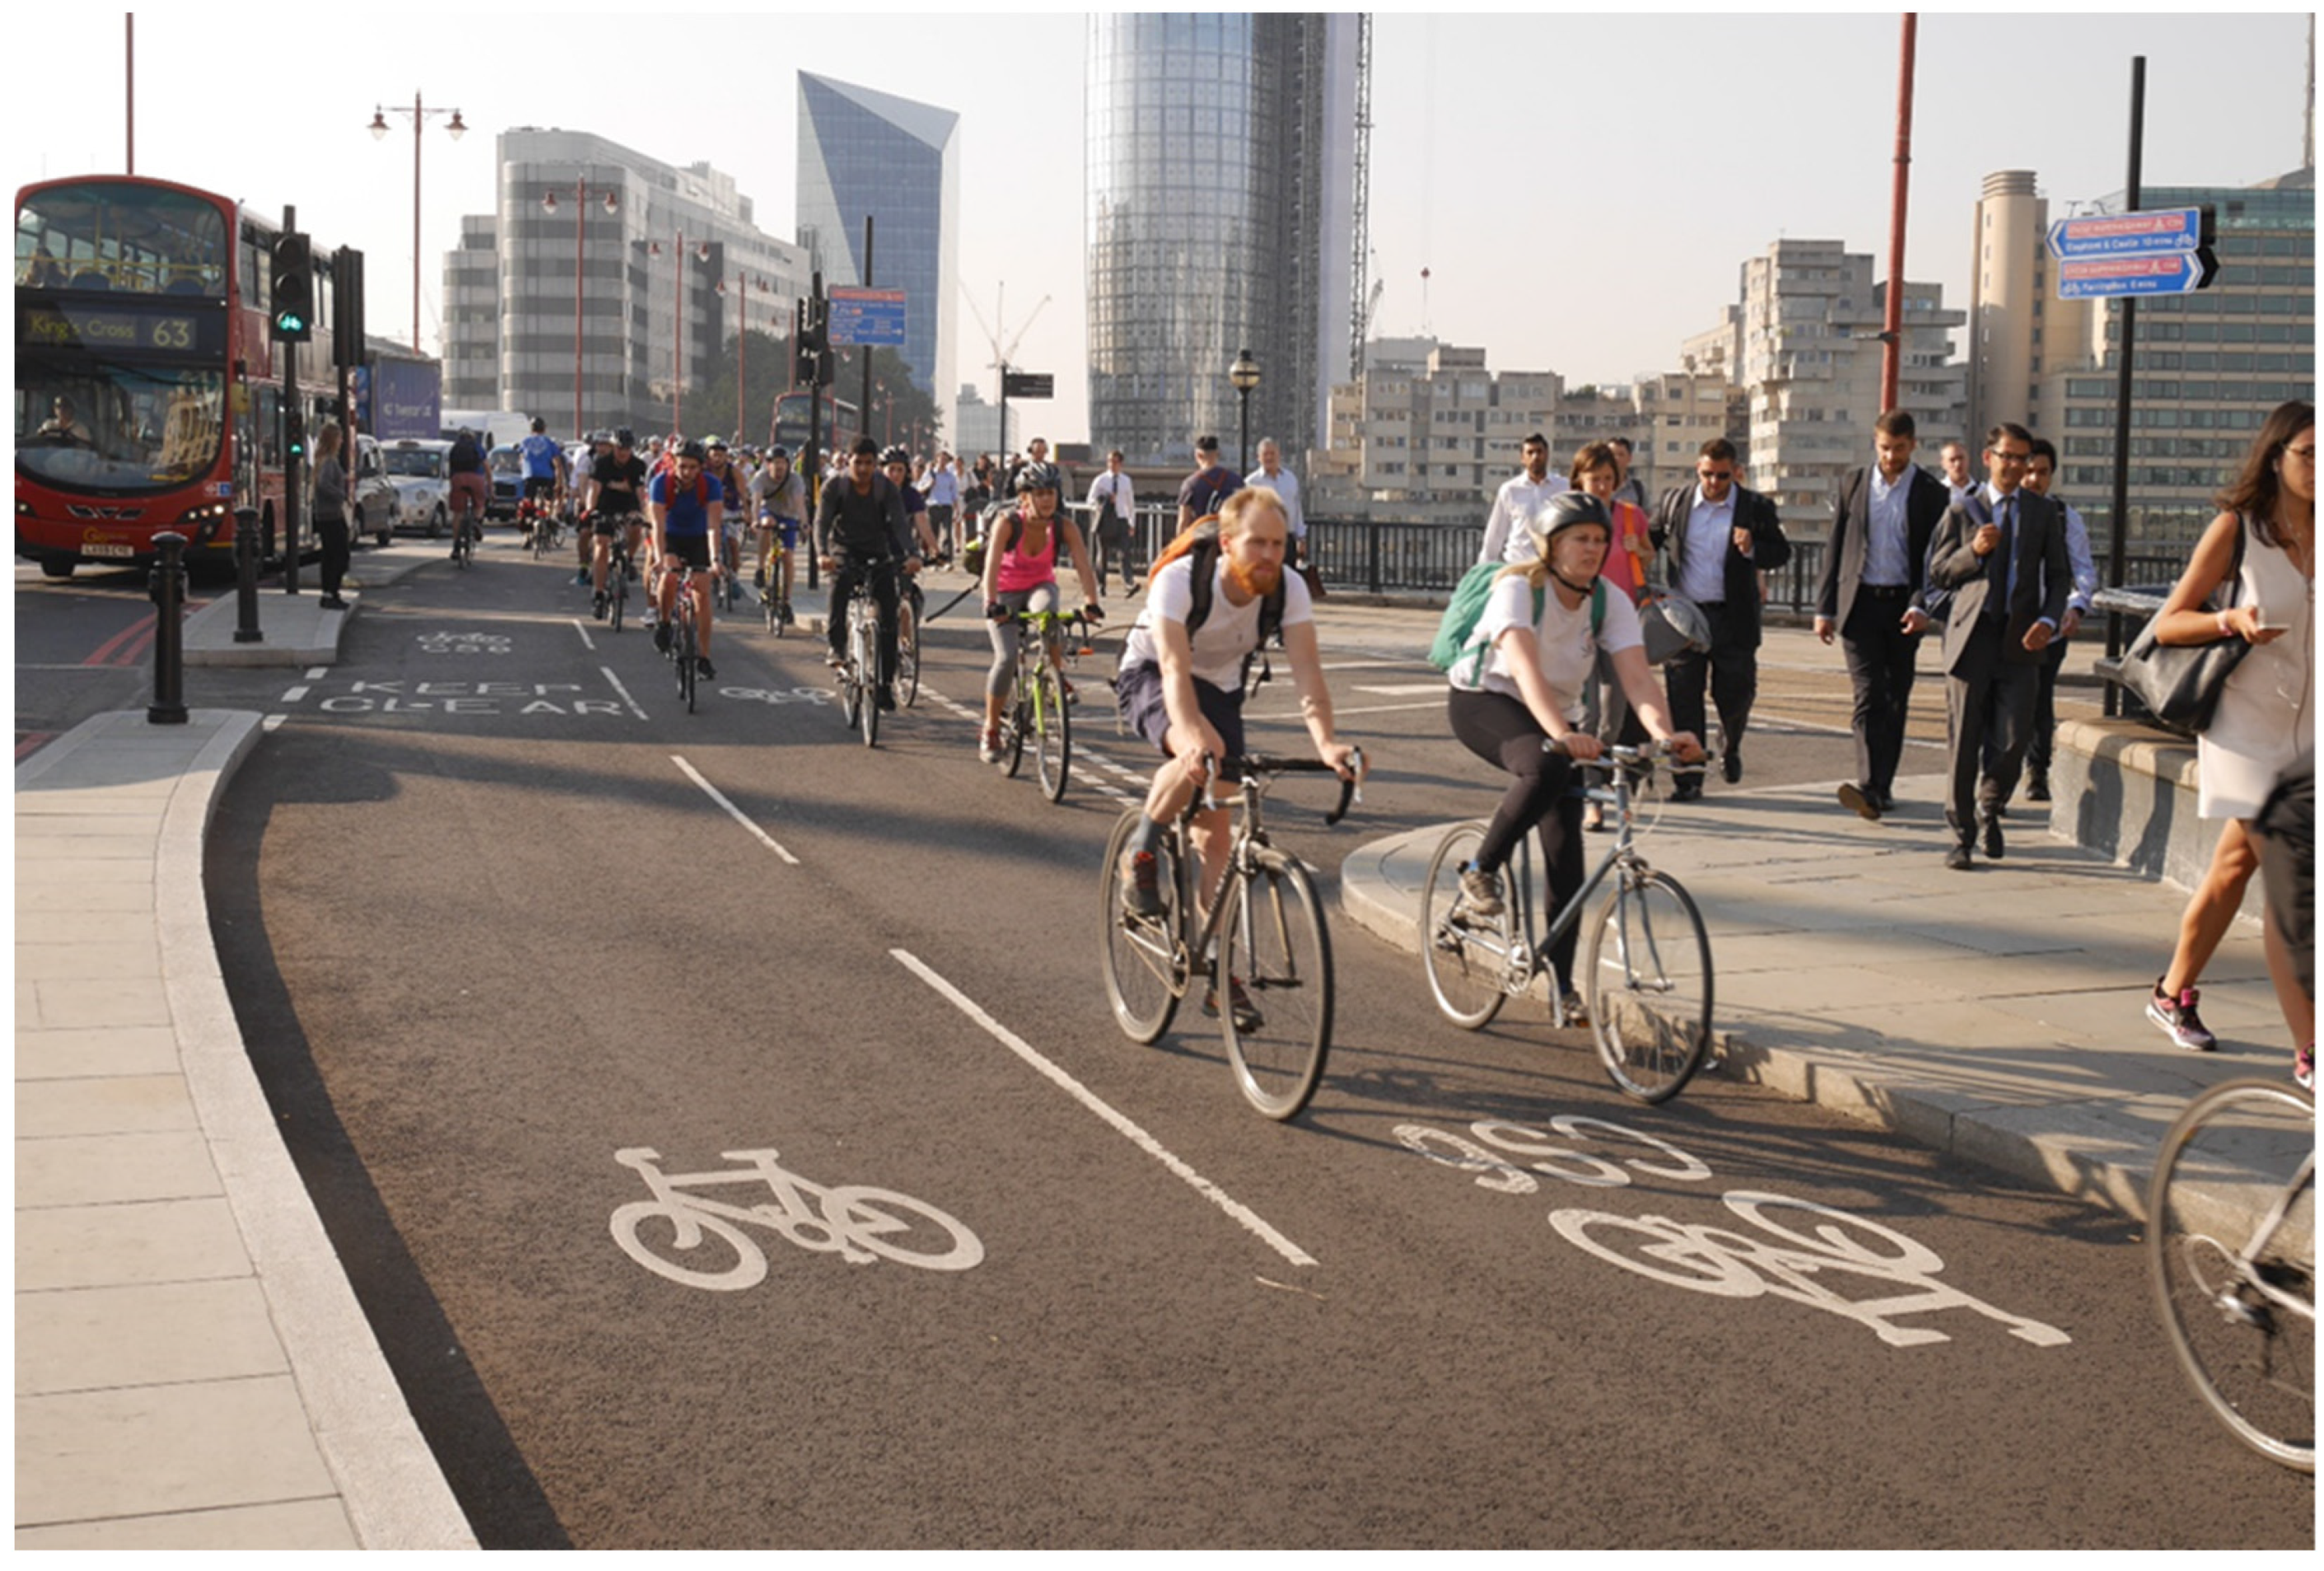 Sustainability Free Full-Text Cycling through the COVID-19 Pandemic to a More Sustainable Transport Future Evidence from Case Studies of 14 Large Bicycle-Friendly Cities in Europe and North America